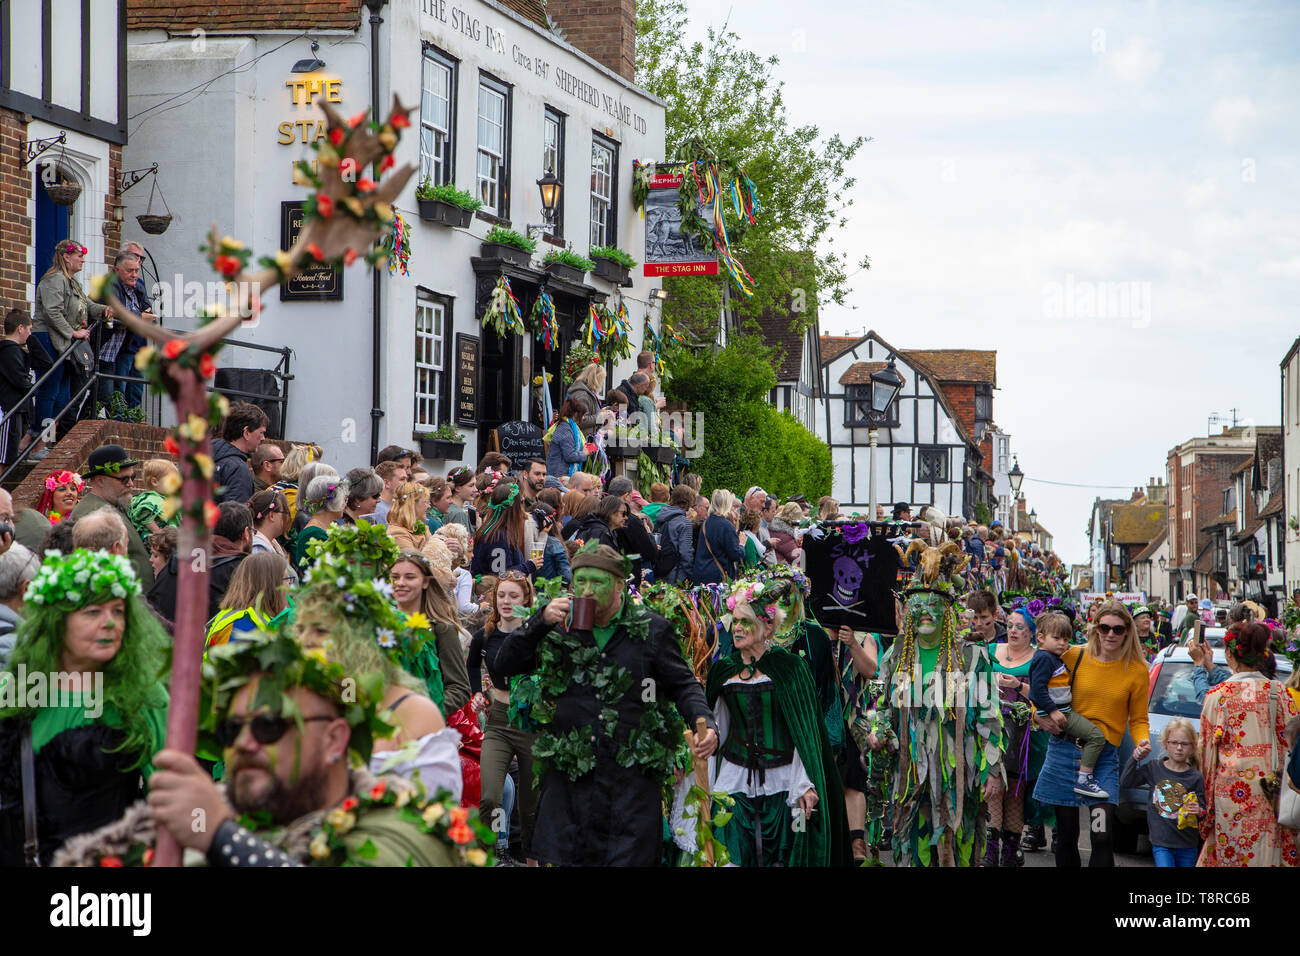 Jack in the Green 2019, Hastings, east sussex, Regno Unito Foto Stock